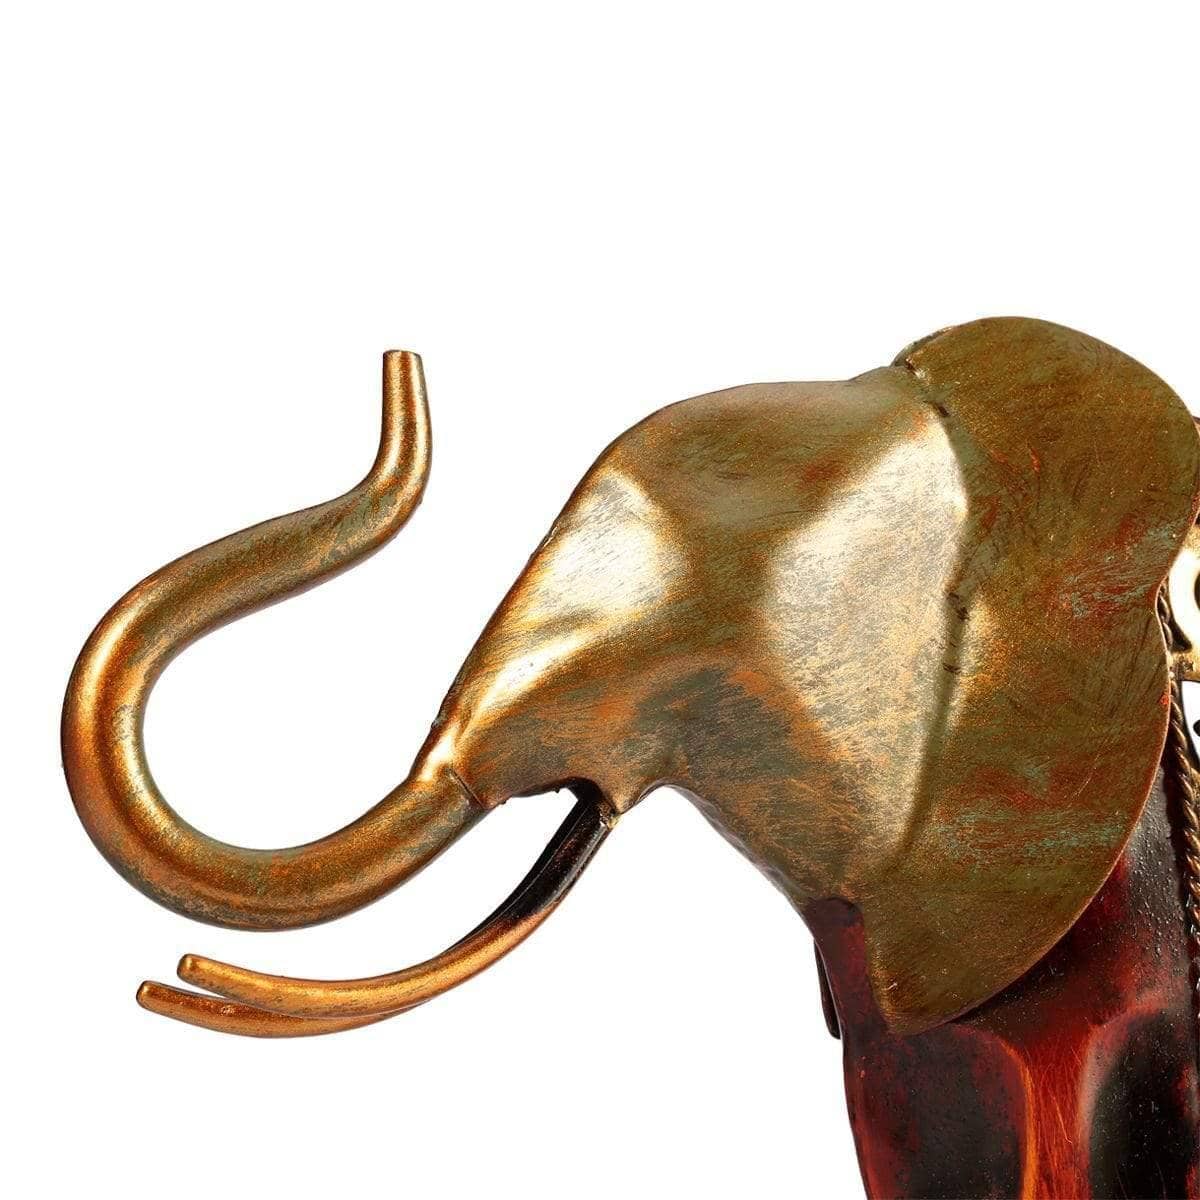 Carved Elephant Figurine Decor - Wild Touch for Your Space